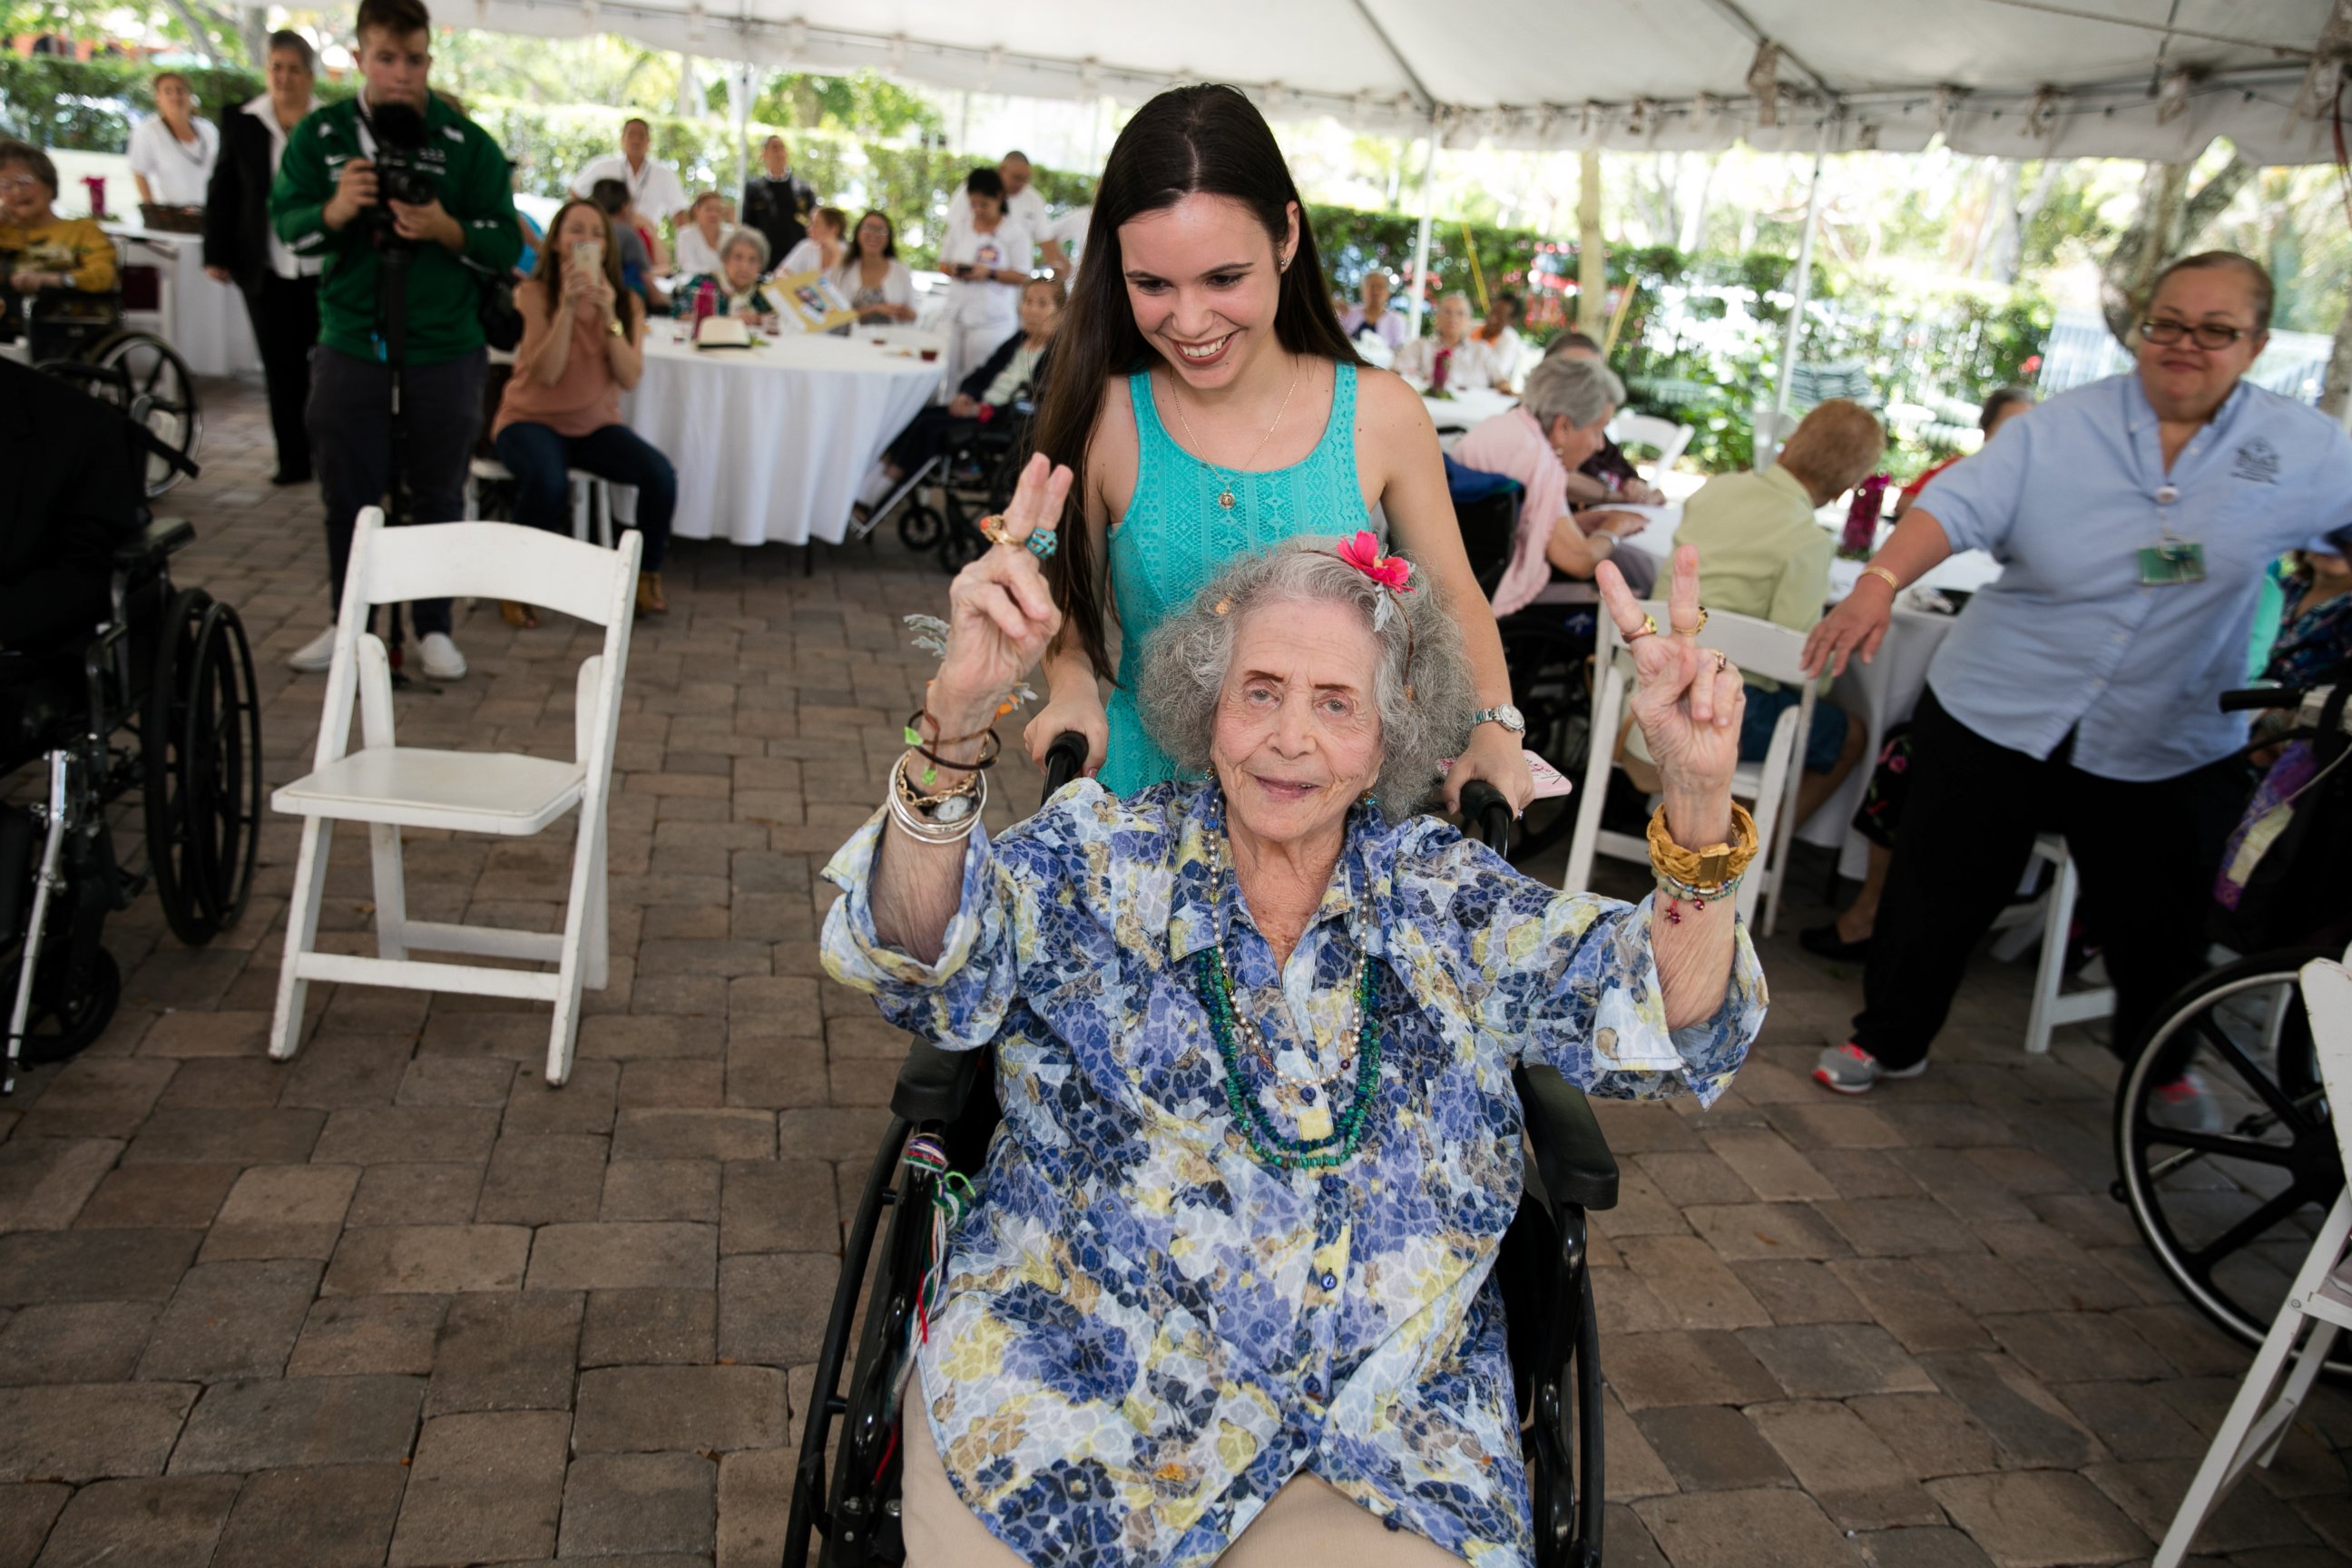 PHOTO: Students at the TERRA Environmental Research Institute in Miami, Florida hosted a "senior" prom for the elderly residents at The Palace Nursing & Rehab Center, April 21, 2016. The prom included music and dancing, food and prom portraits. 
